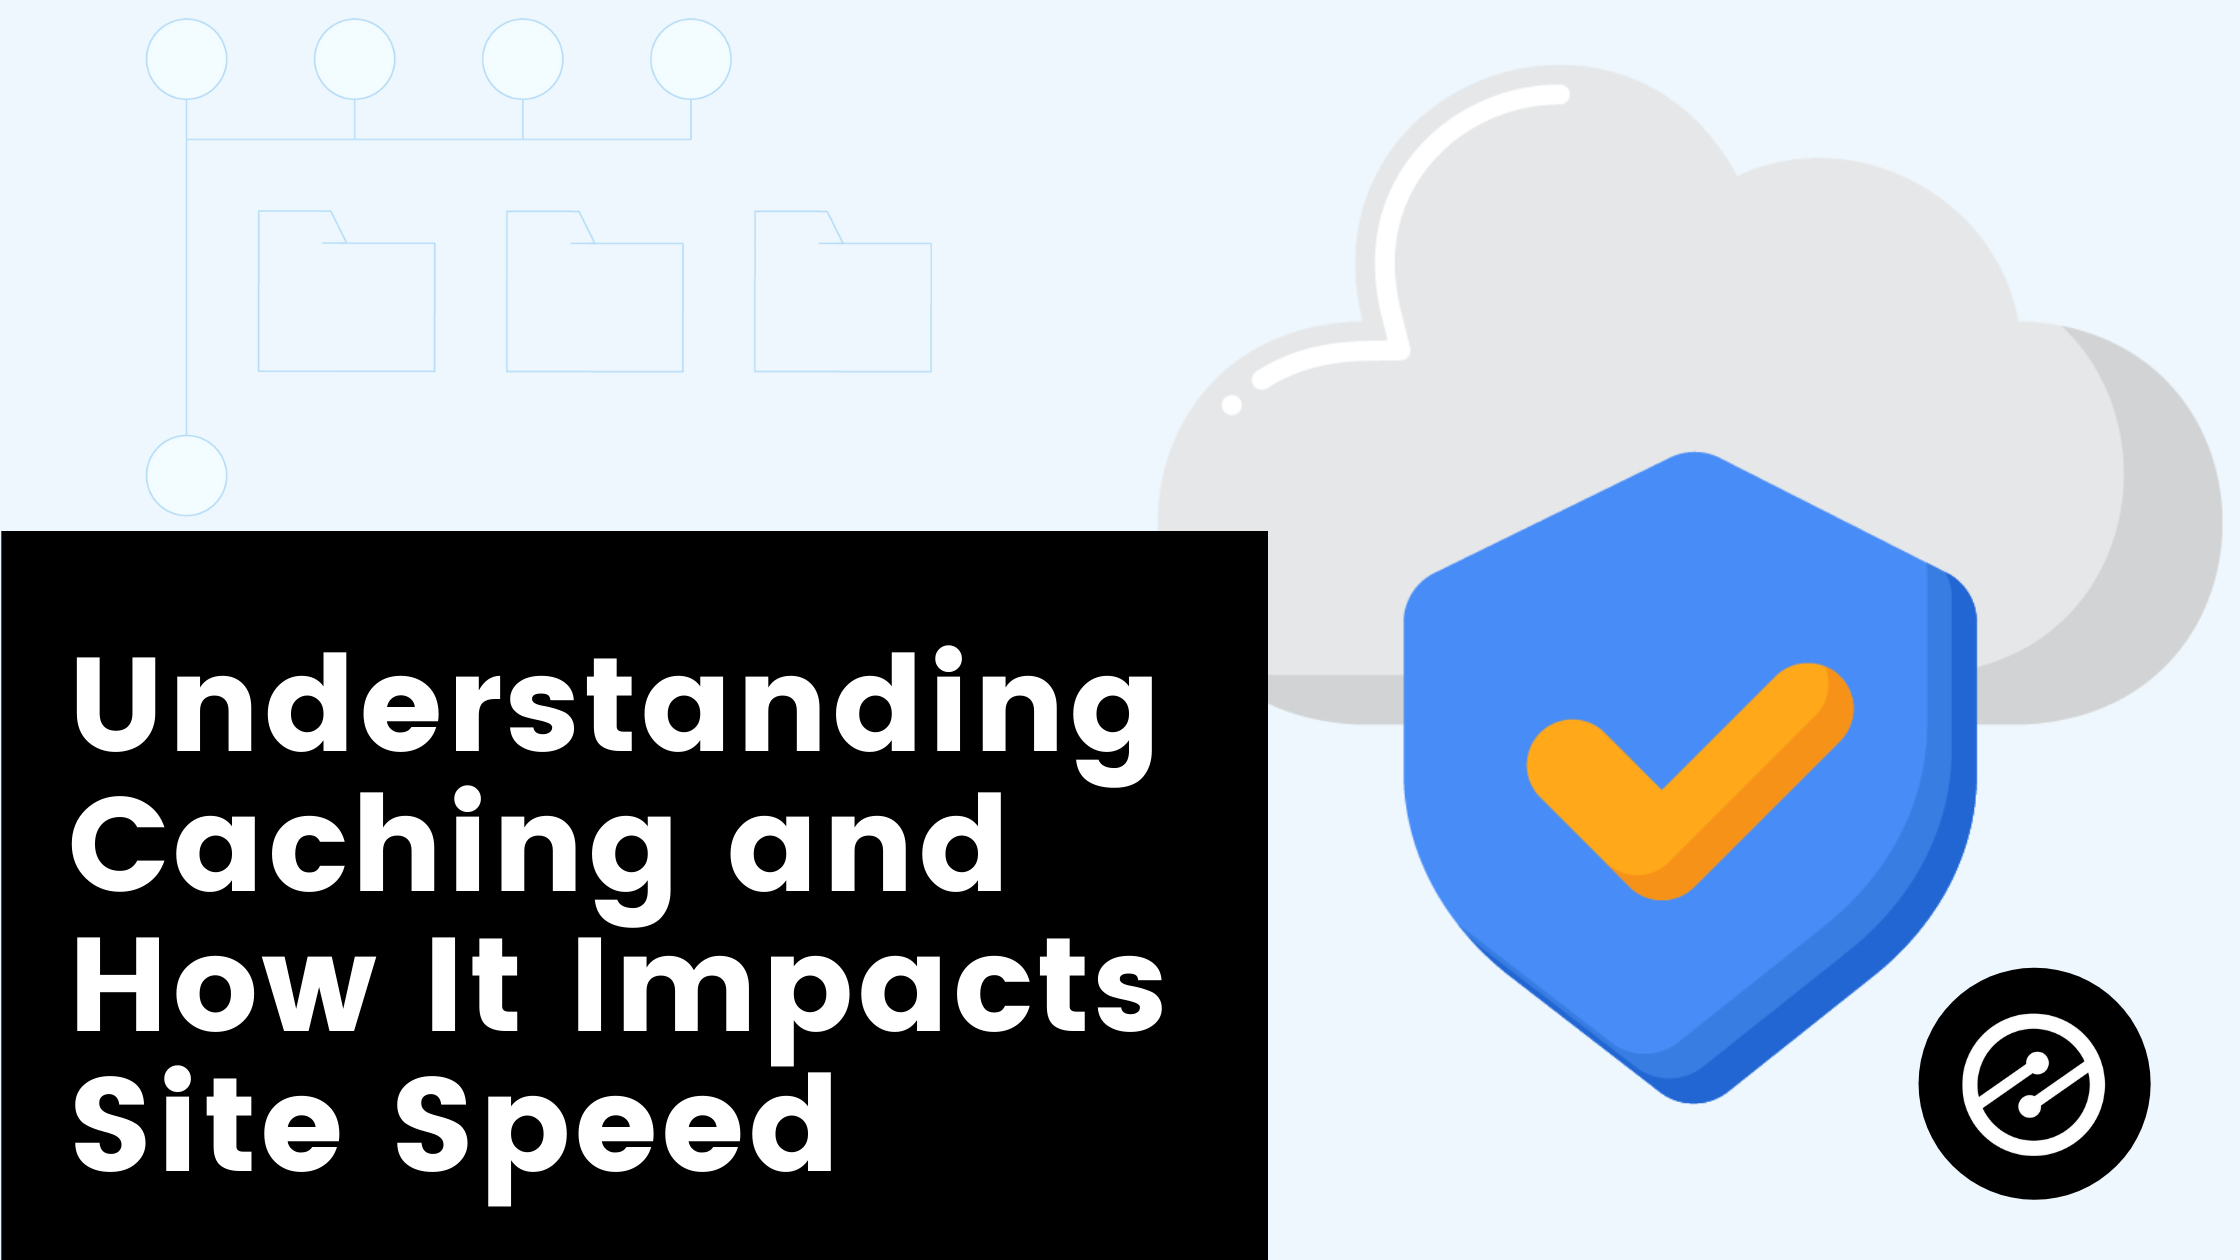 Understanding Caching and How It Impacts Site Speed